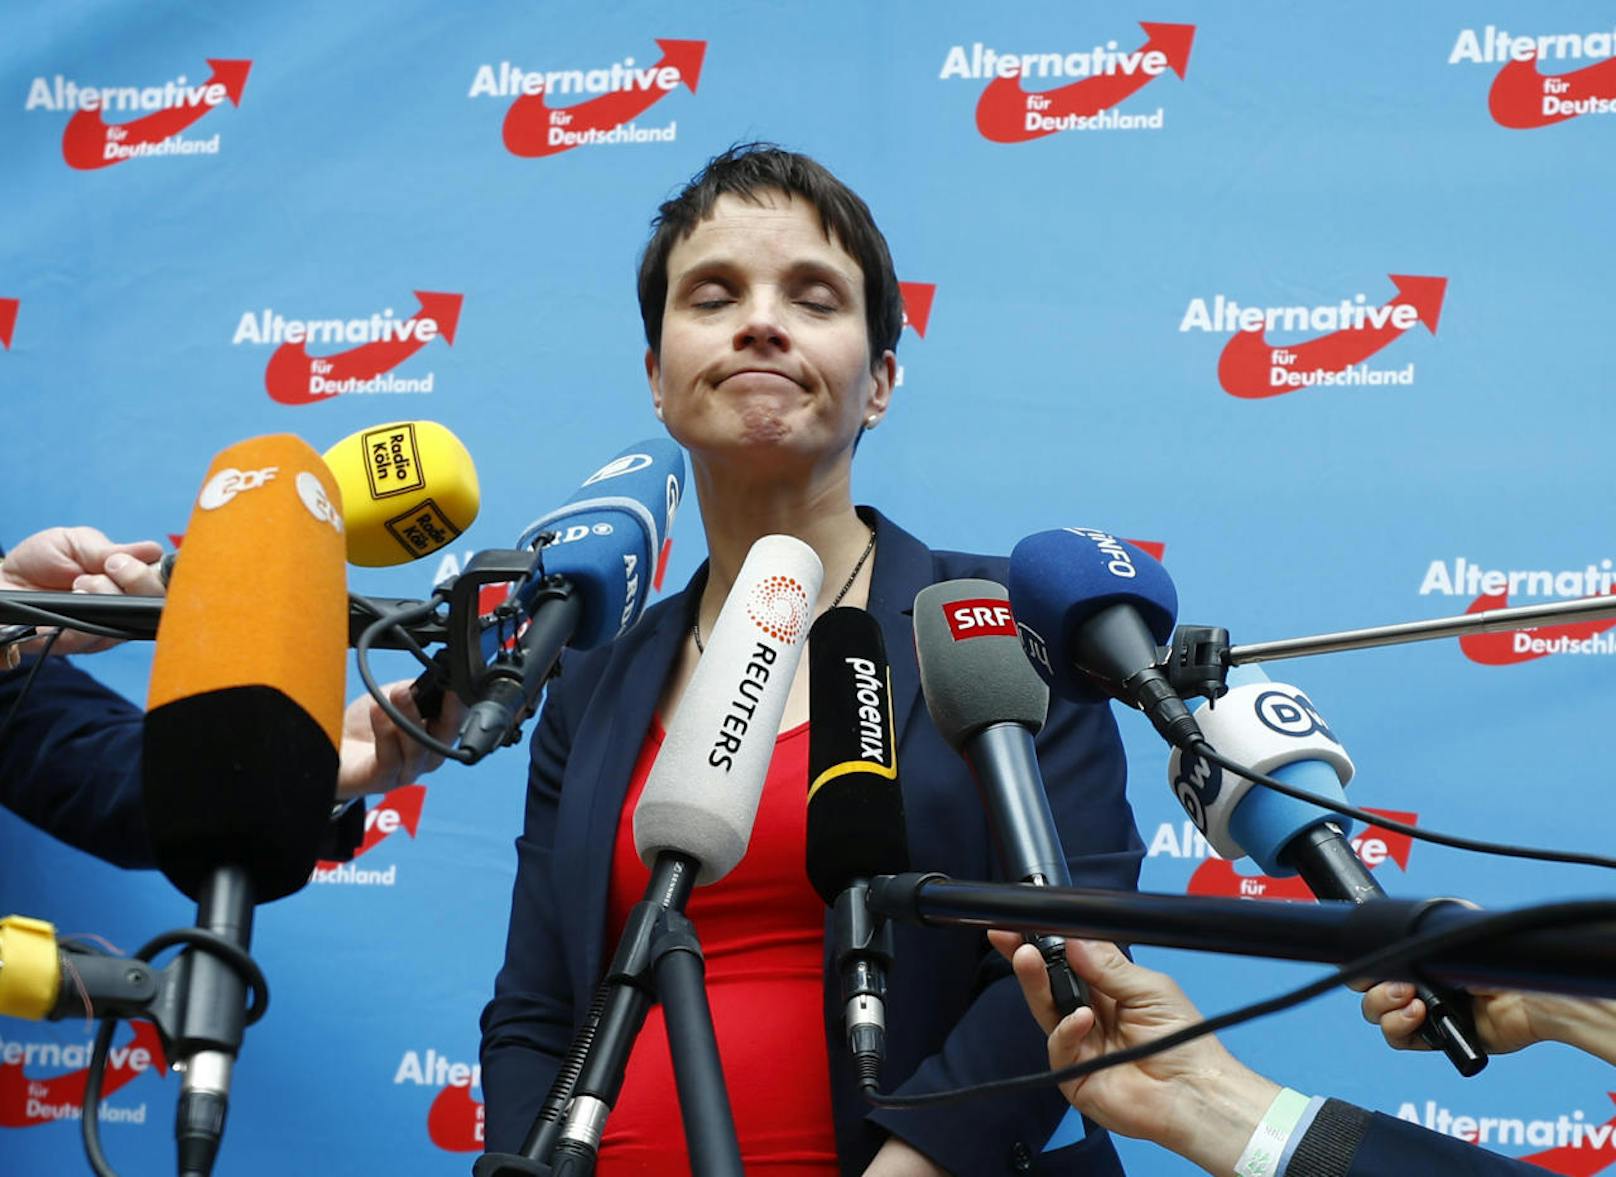 AFD chairwoman Frauke Petry, Germany's anti-immigration party Alternative for Germany (AFD) speaks  to the press during the AFD's party congress in Cologne Germany, April 22, 2017. REUTERS/Wolfgang Rattay - RTS13F2H